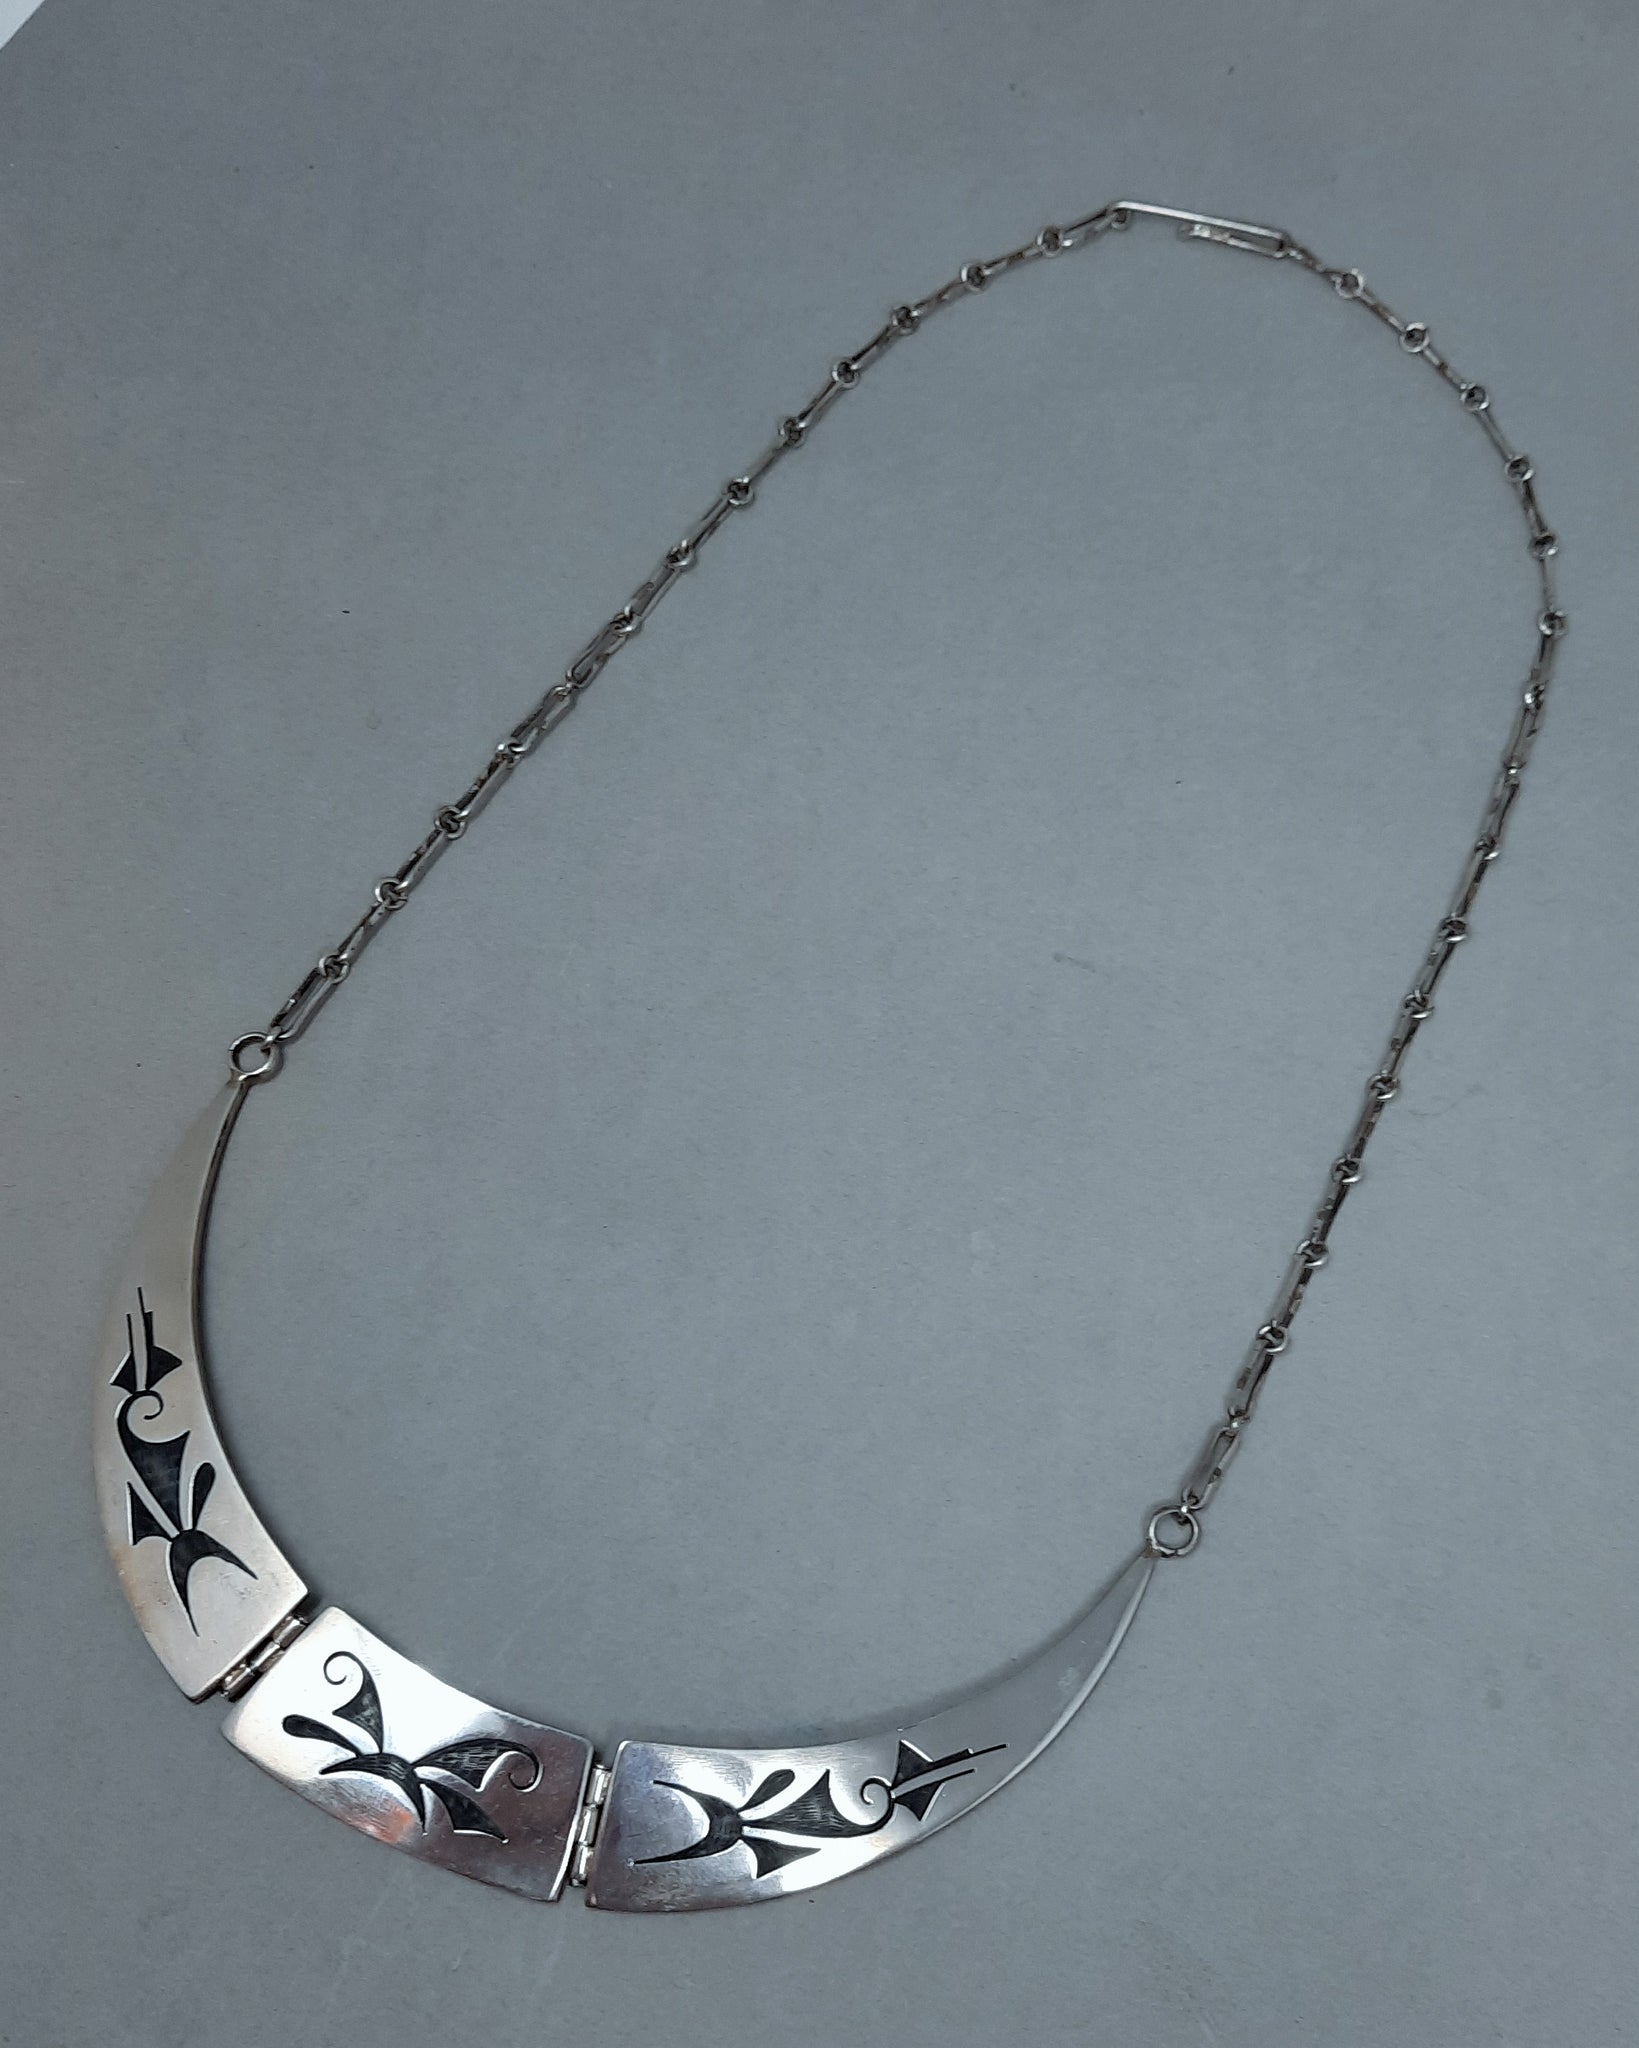 Wilson Mowa Hopi Sterilng Silver Gorget Butterfly Necklace